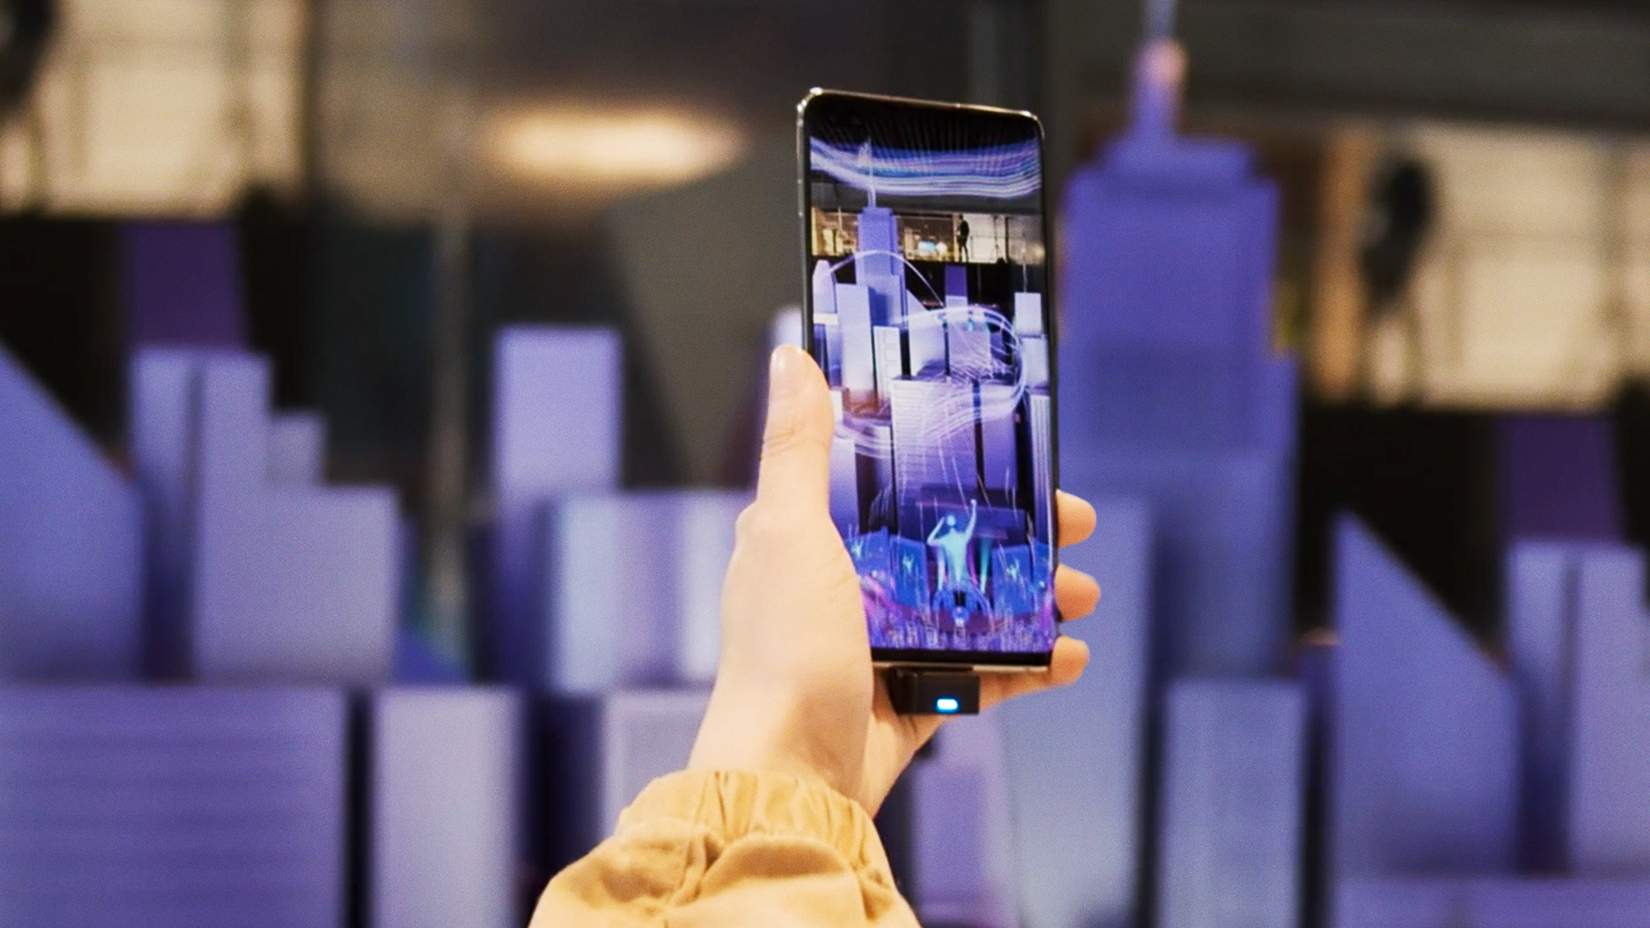 A person's hand holding a phone with AR graphics on a purple art installation for Samsung